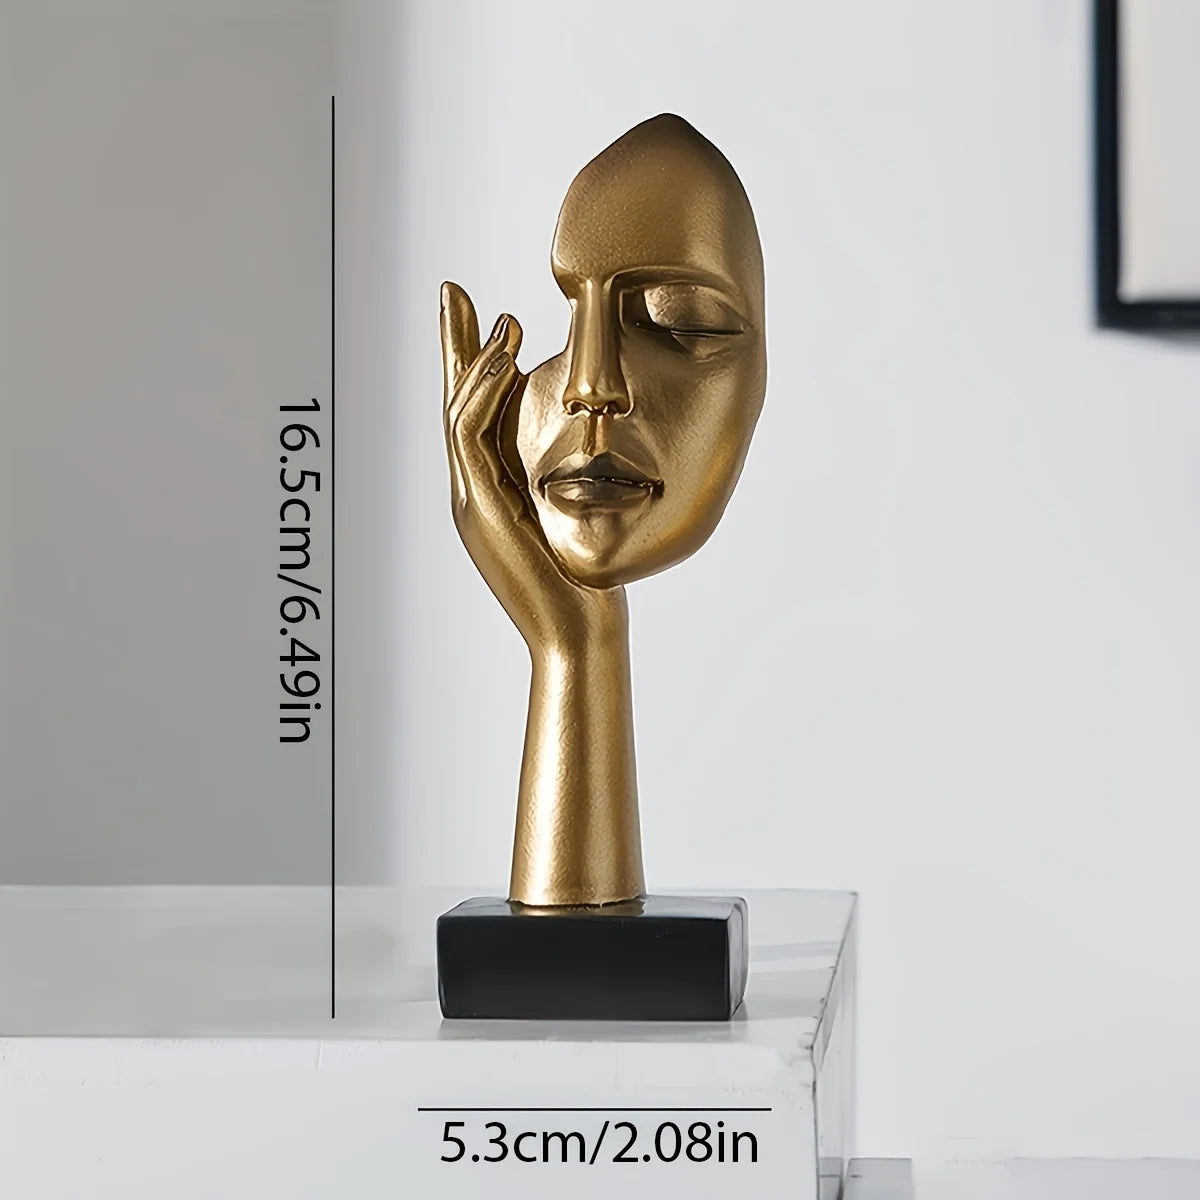 1pc, Decoration Craft, Modern Abstract Design Decoration , Thinker Statue Home Decor, Collectible Figurine For Bedroom Desktop